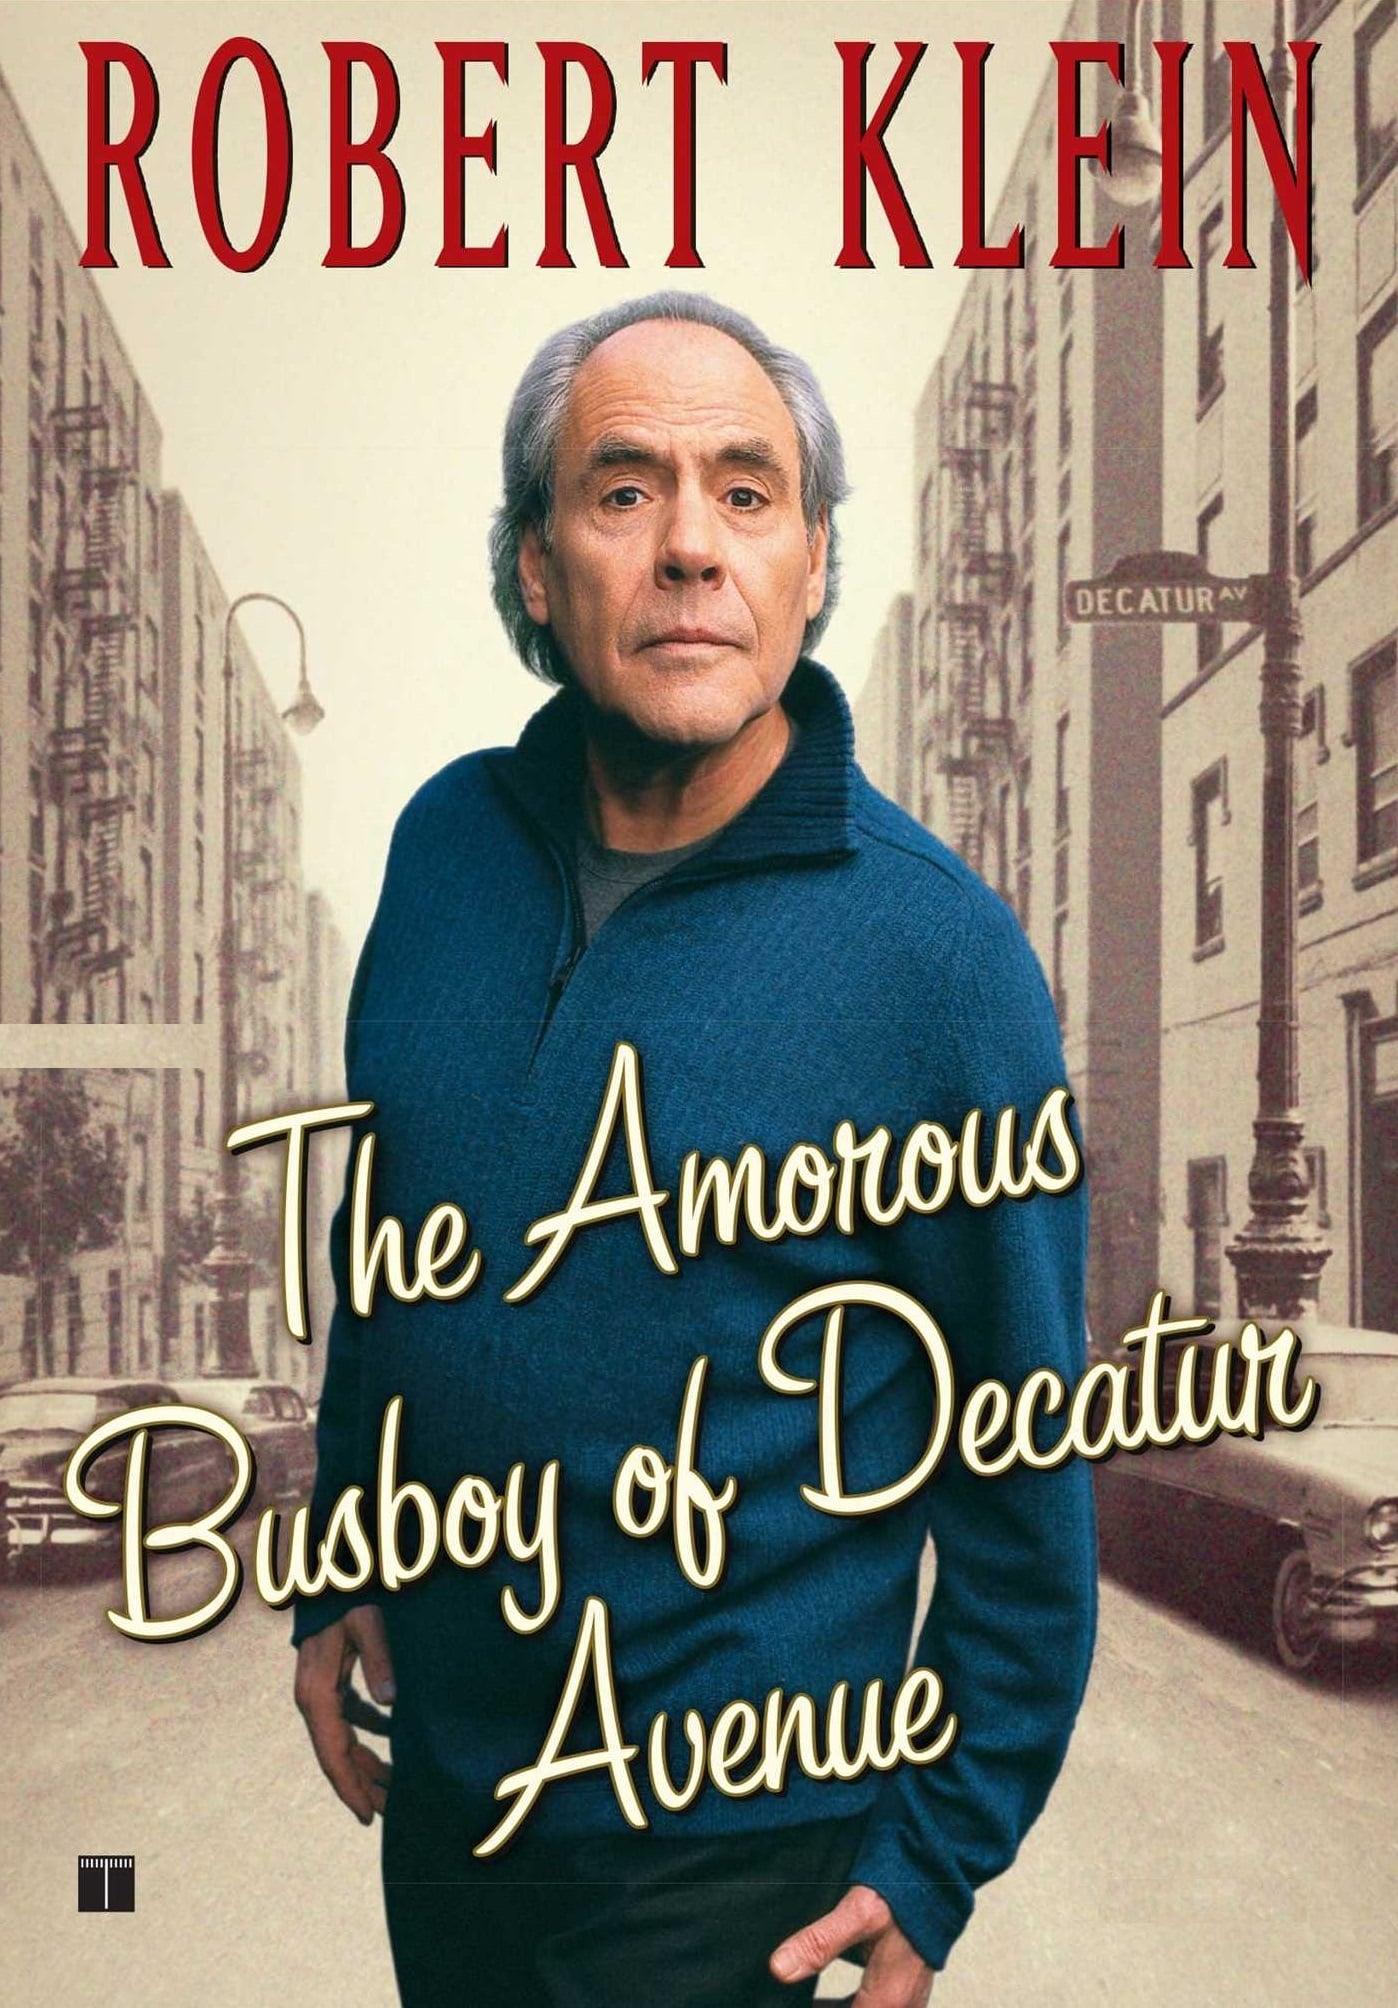 Robert Klein: The Amorous Busboy of Decatur Avenue poster